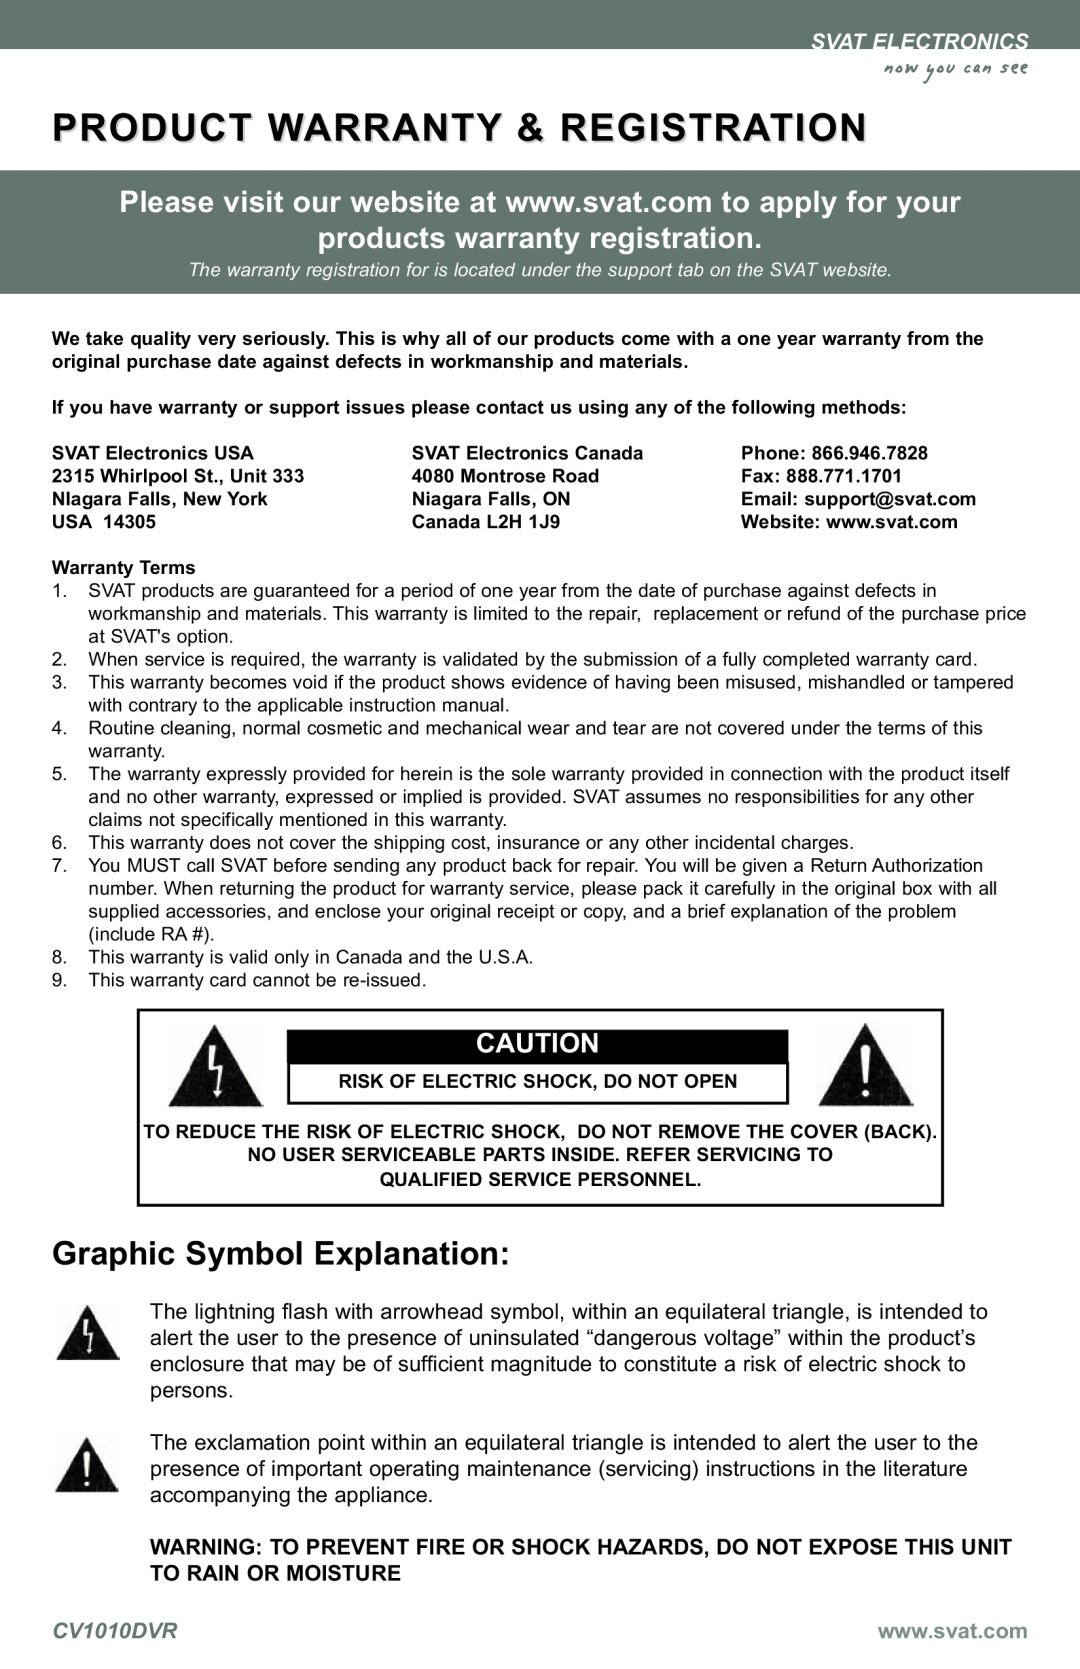 SVAT Electronics CV1010 PRODUCT WARRANTY & REGISTRATION now you can see, Graphic Symbol Explanation, Svat Electronics 